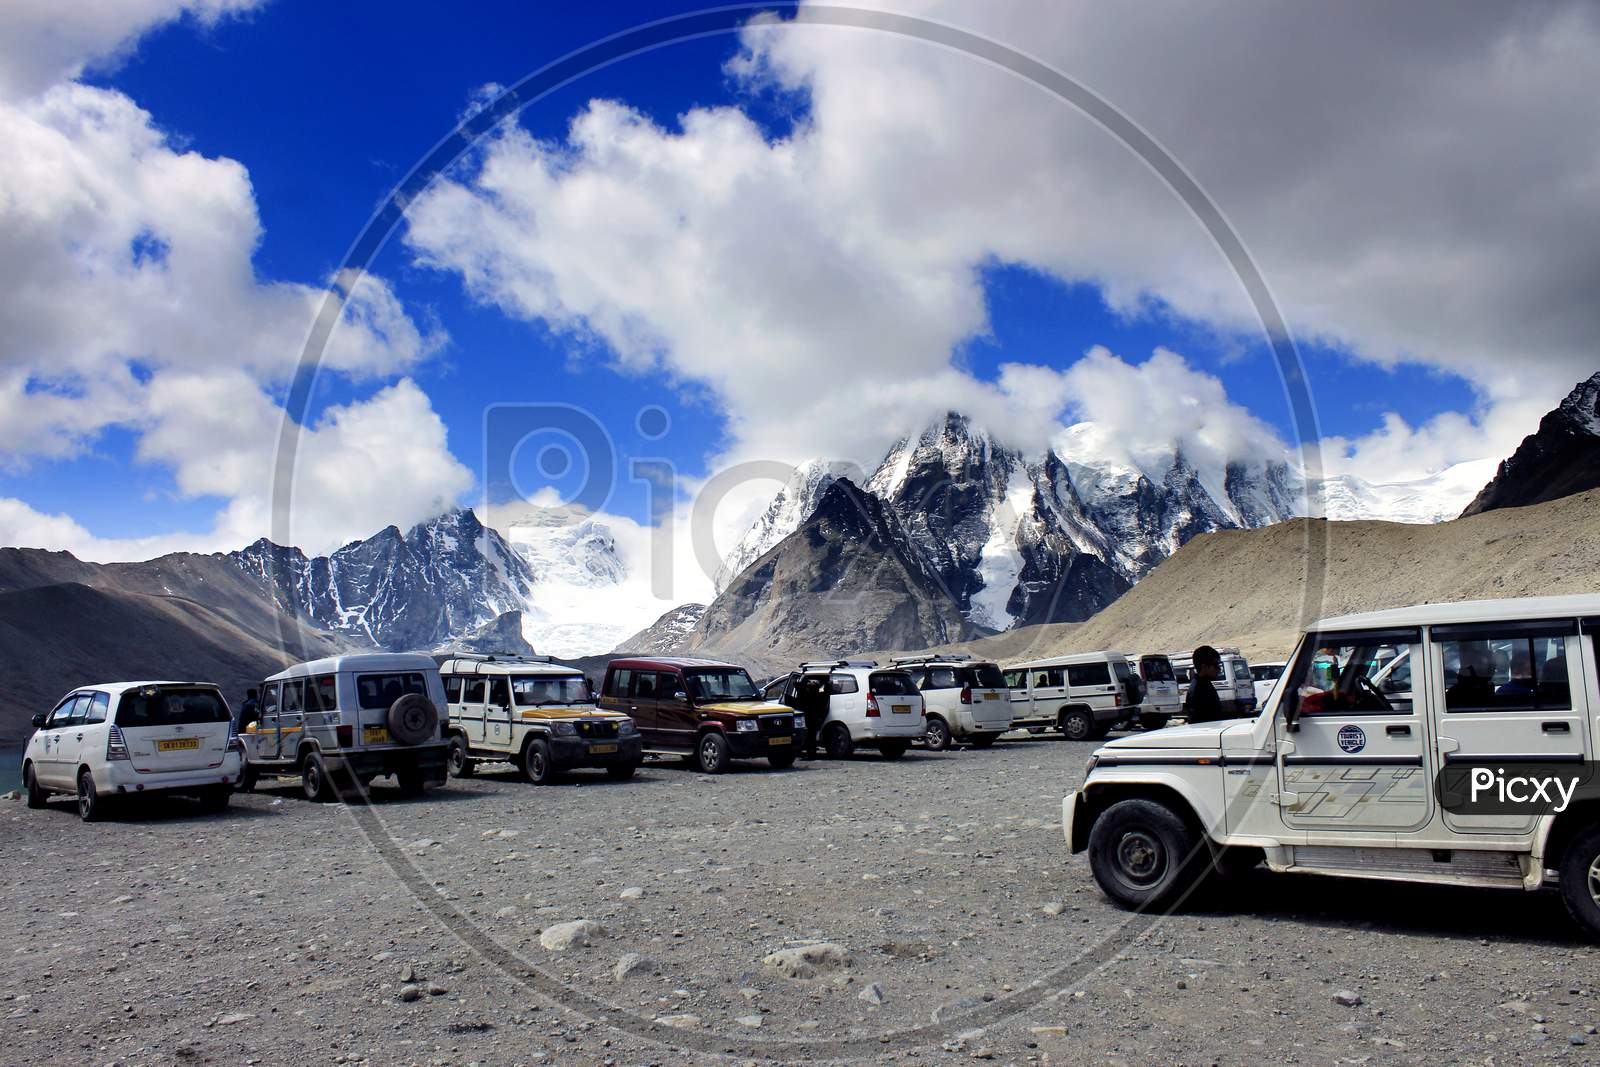 Snow Capped Mountains of Sikkim with Vehicles in the Foreground